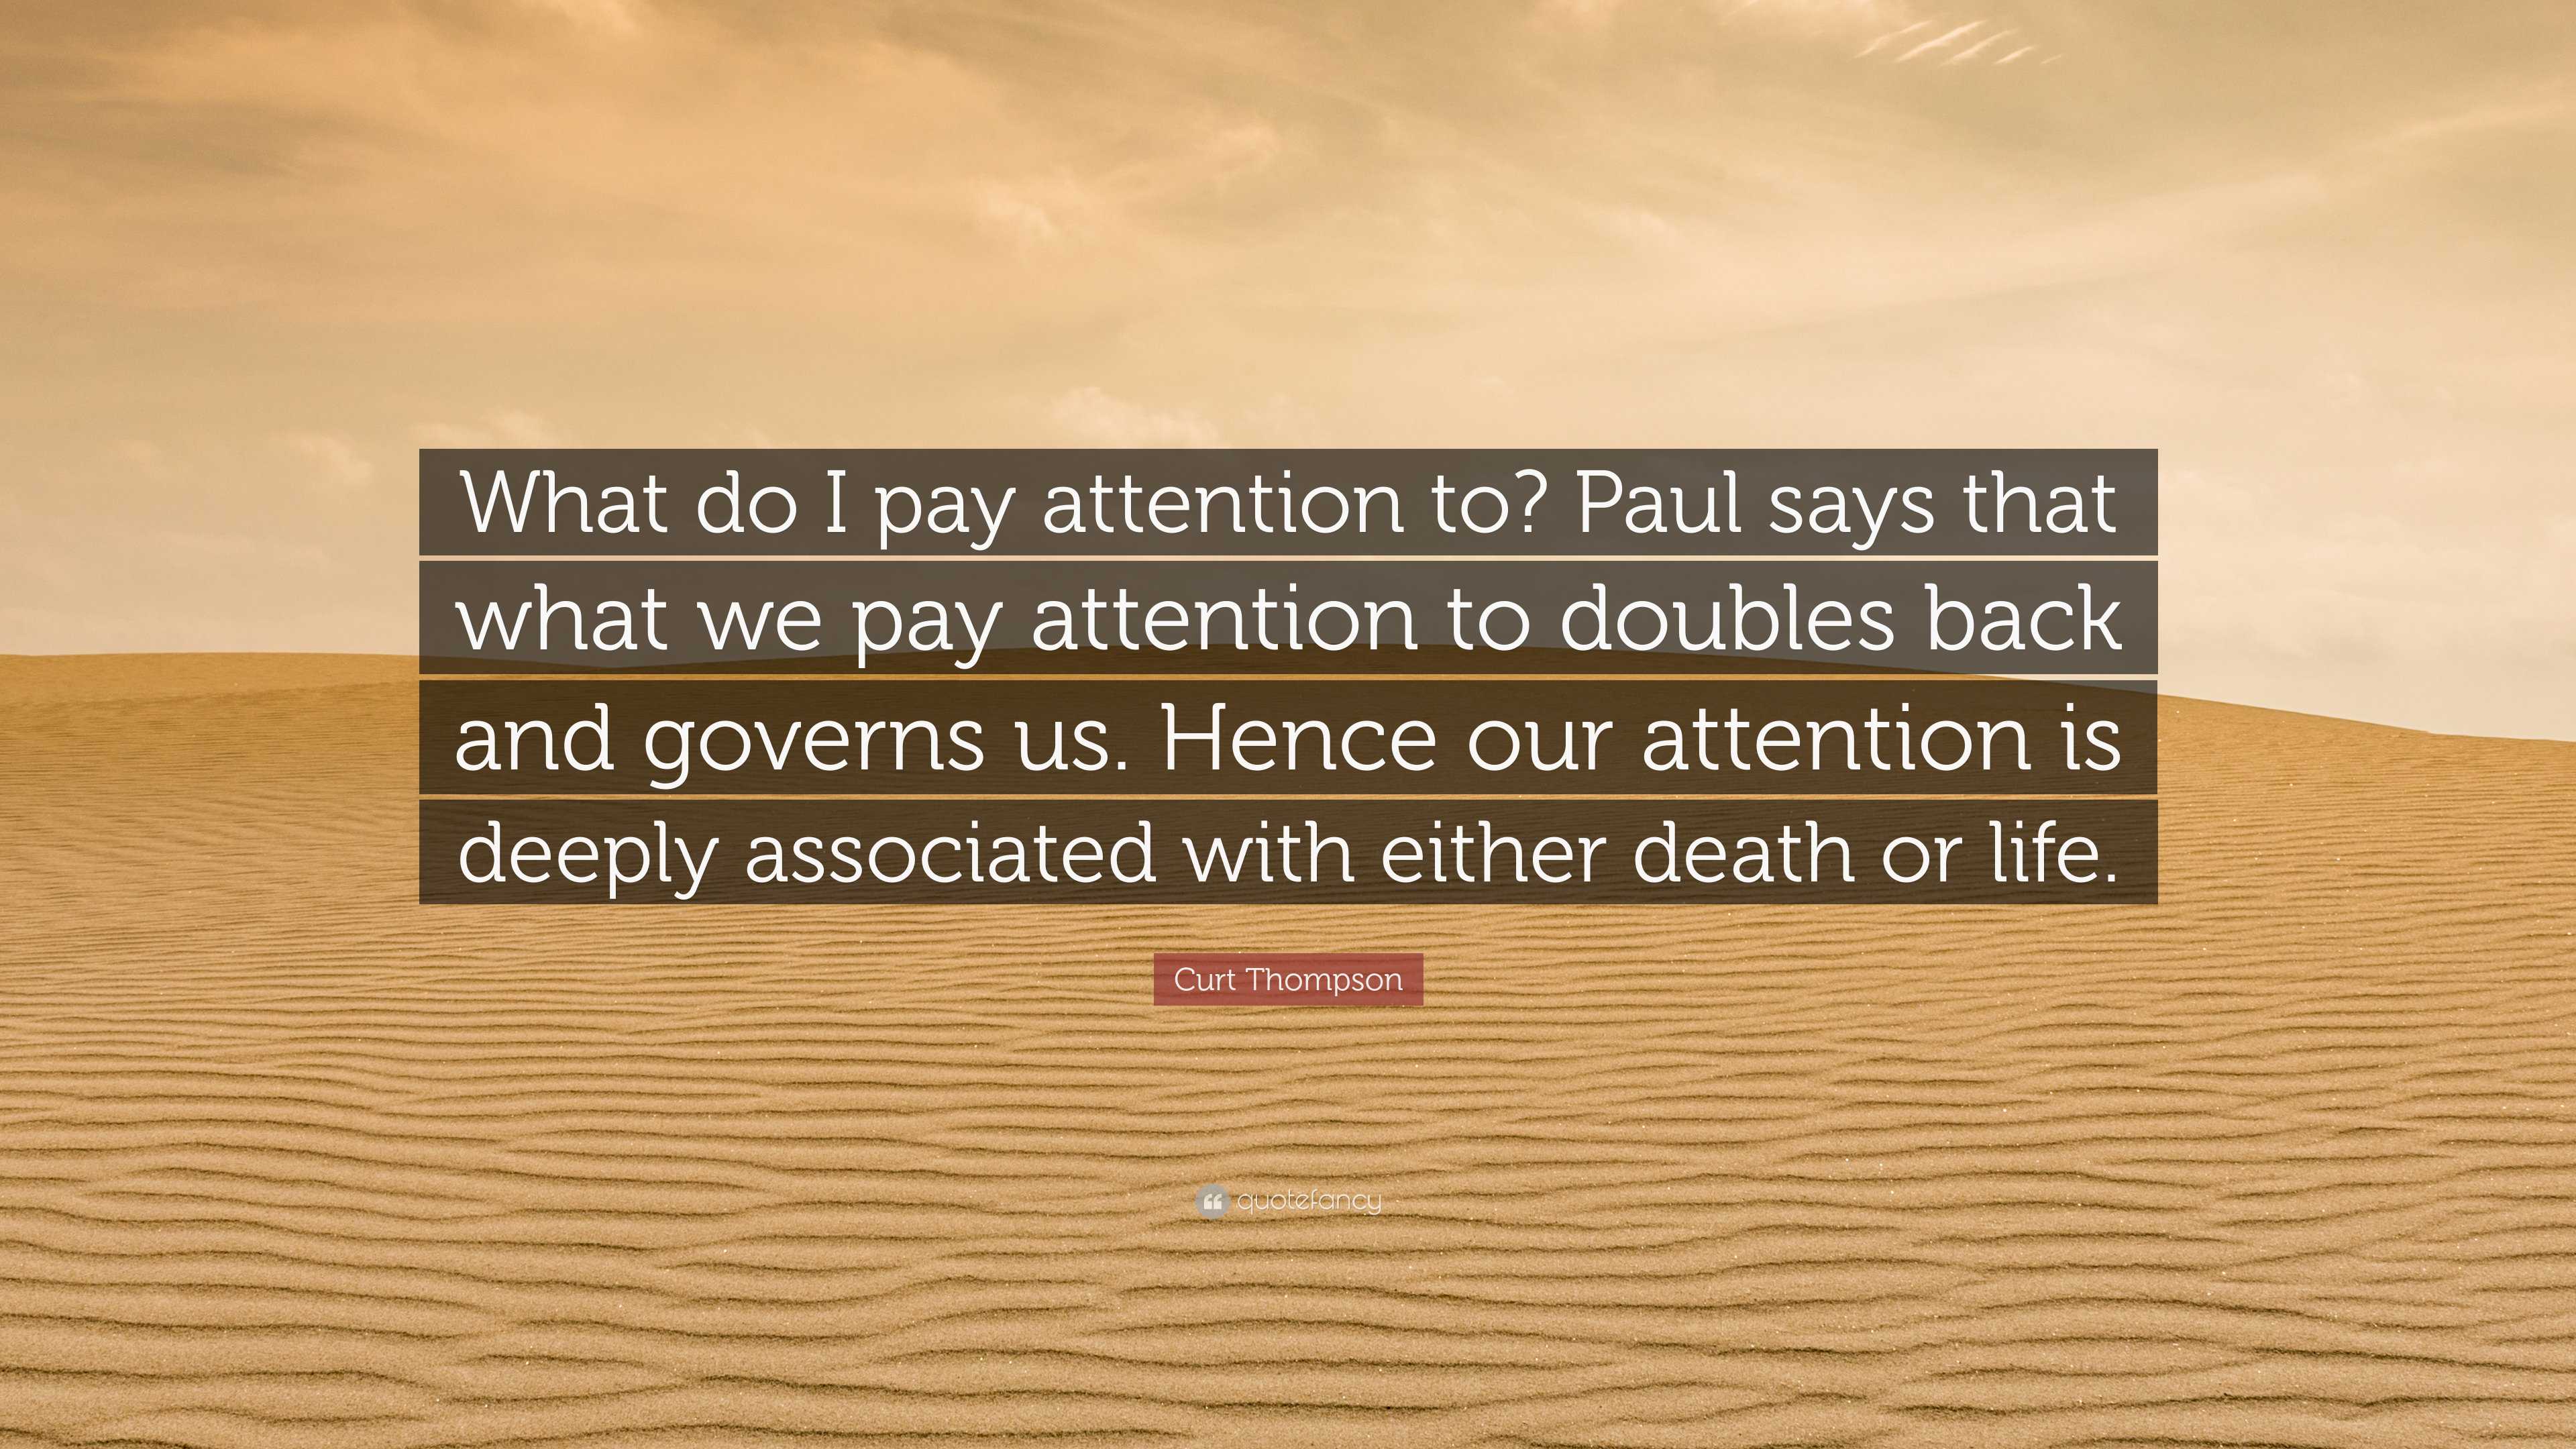 Curt Thompson Quote “What do I pay attention to? Paul says that what